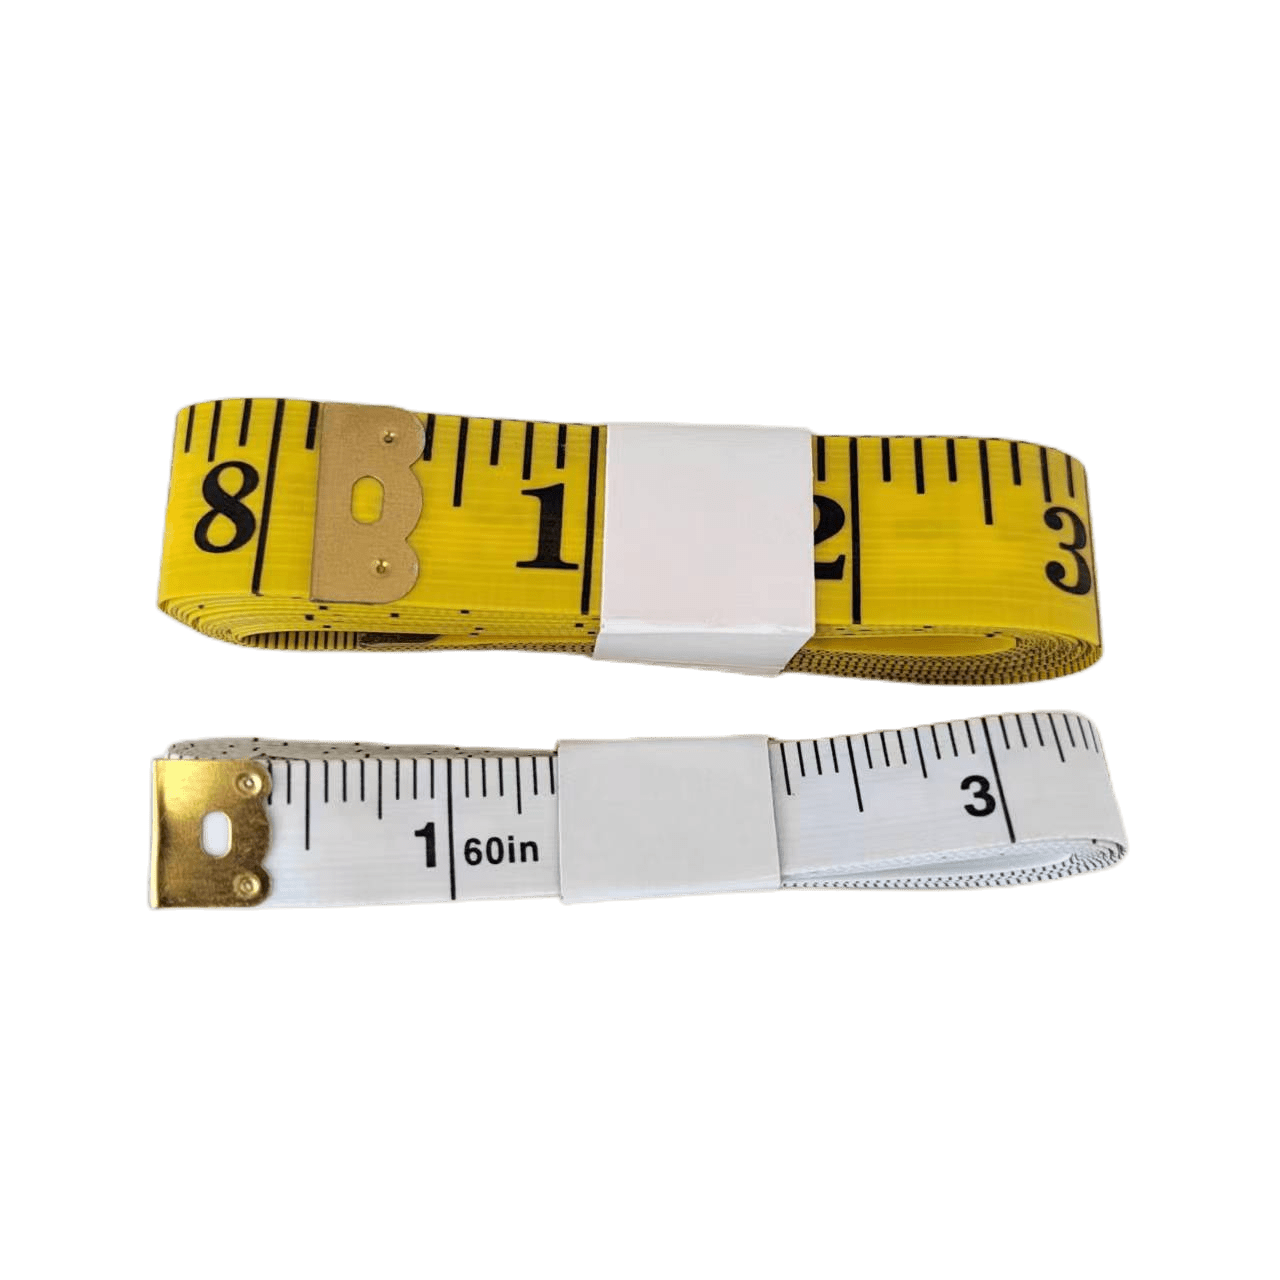 120 Inch (300 cm) Soft Tailor Tape Measure for Sewing - Yellow 